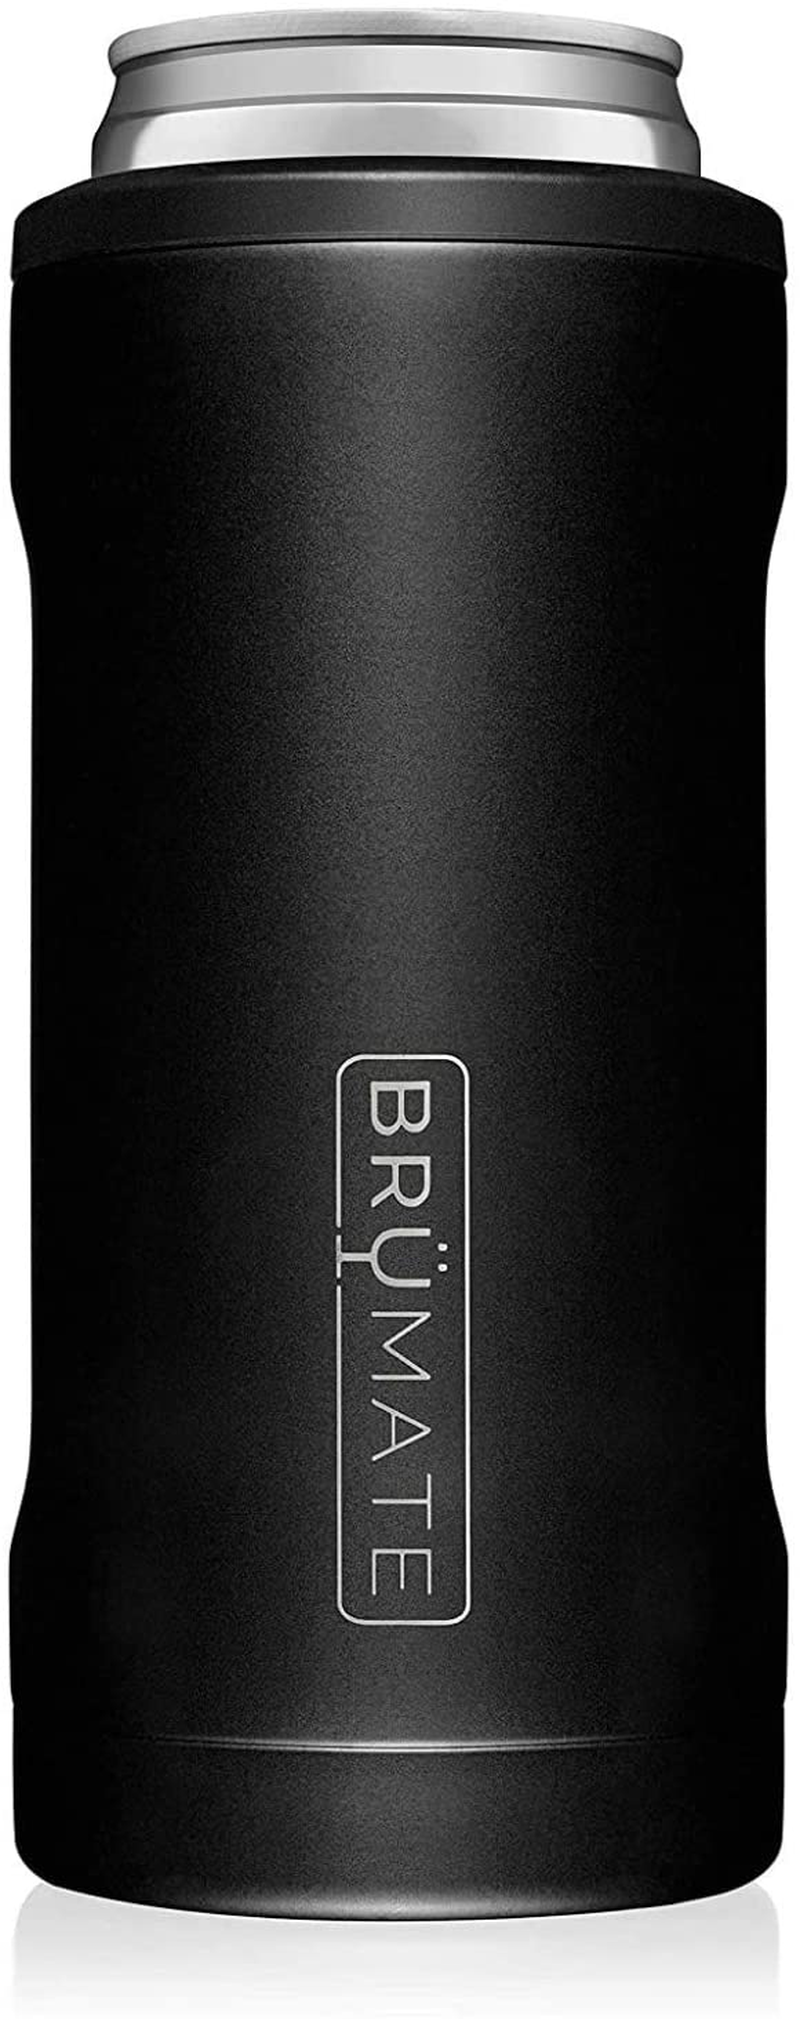 BrüMate Hopsulator Slim Double-walled Stainless Steel Insulated Can Cooler for 12 Oz Slim Cans